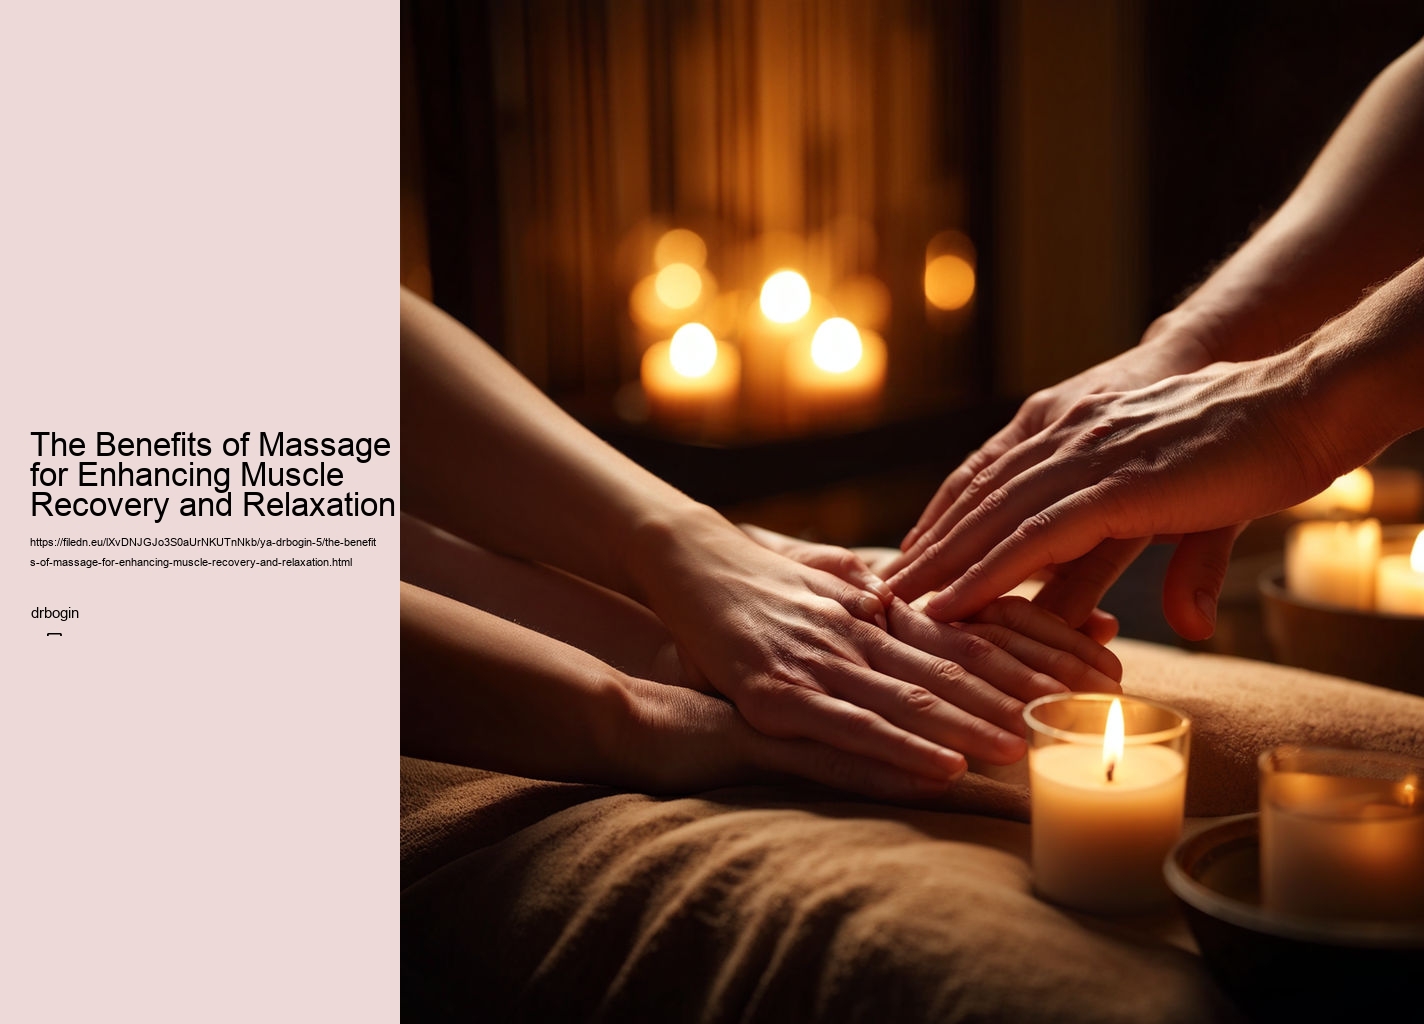 The Benefits of Massage for Enhancing Muscle Recovery and Relaxation